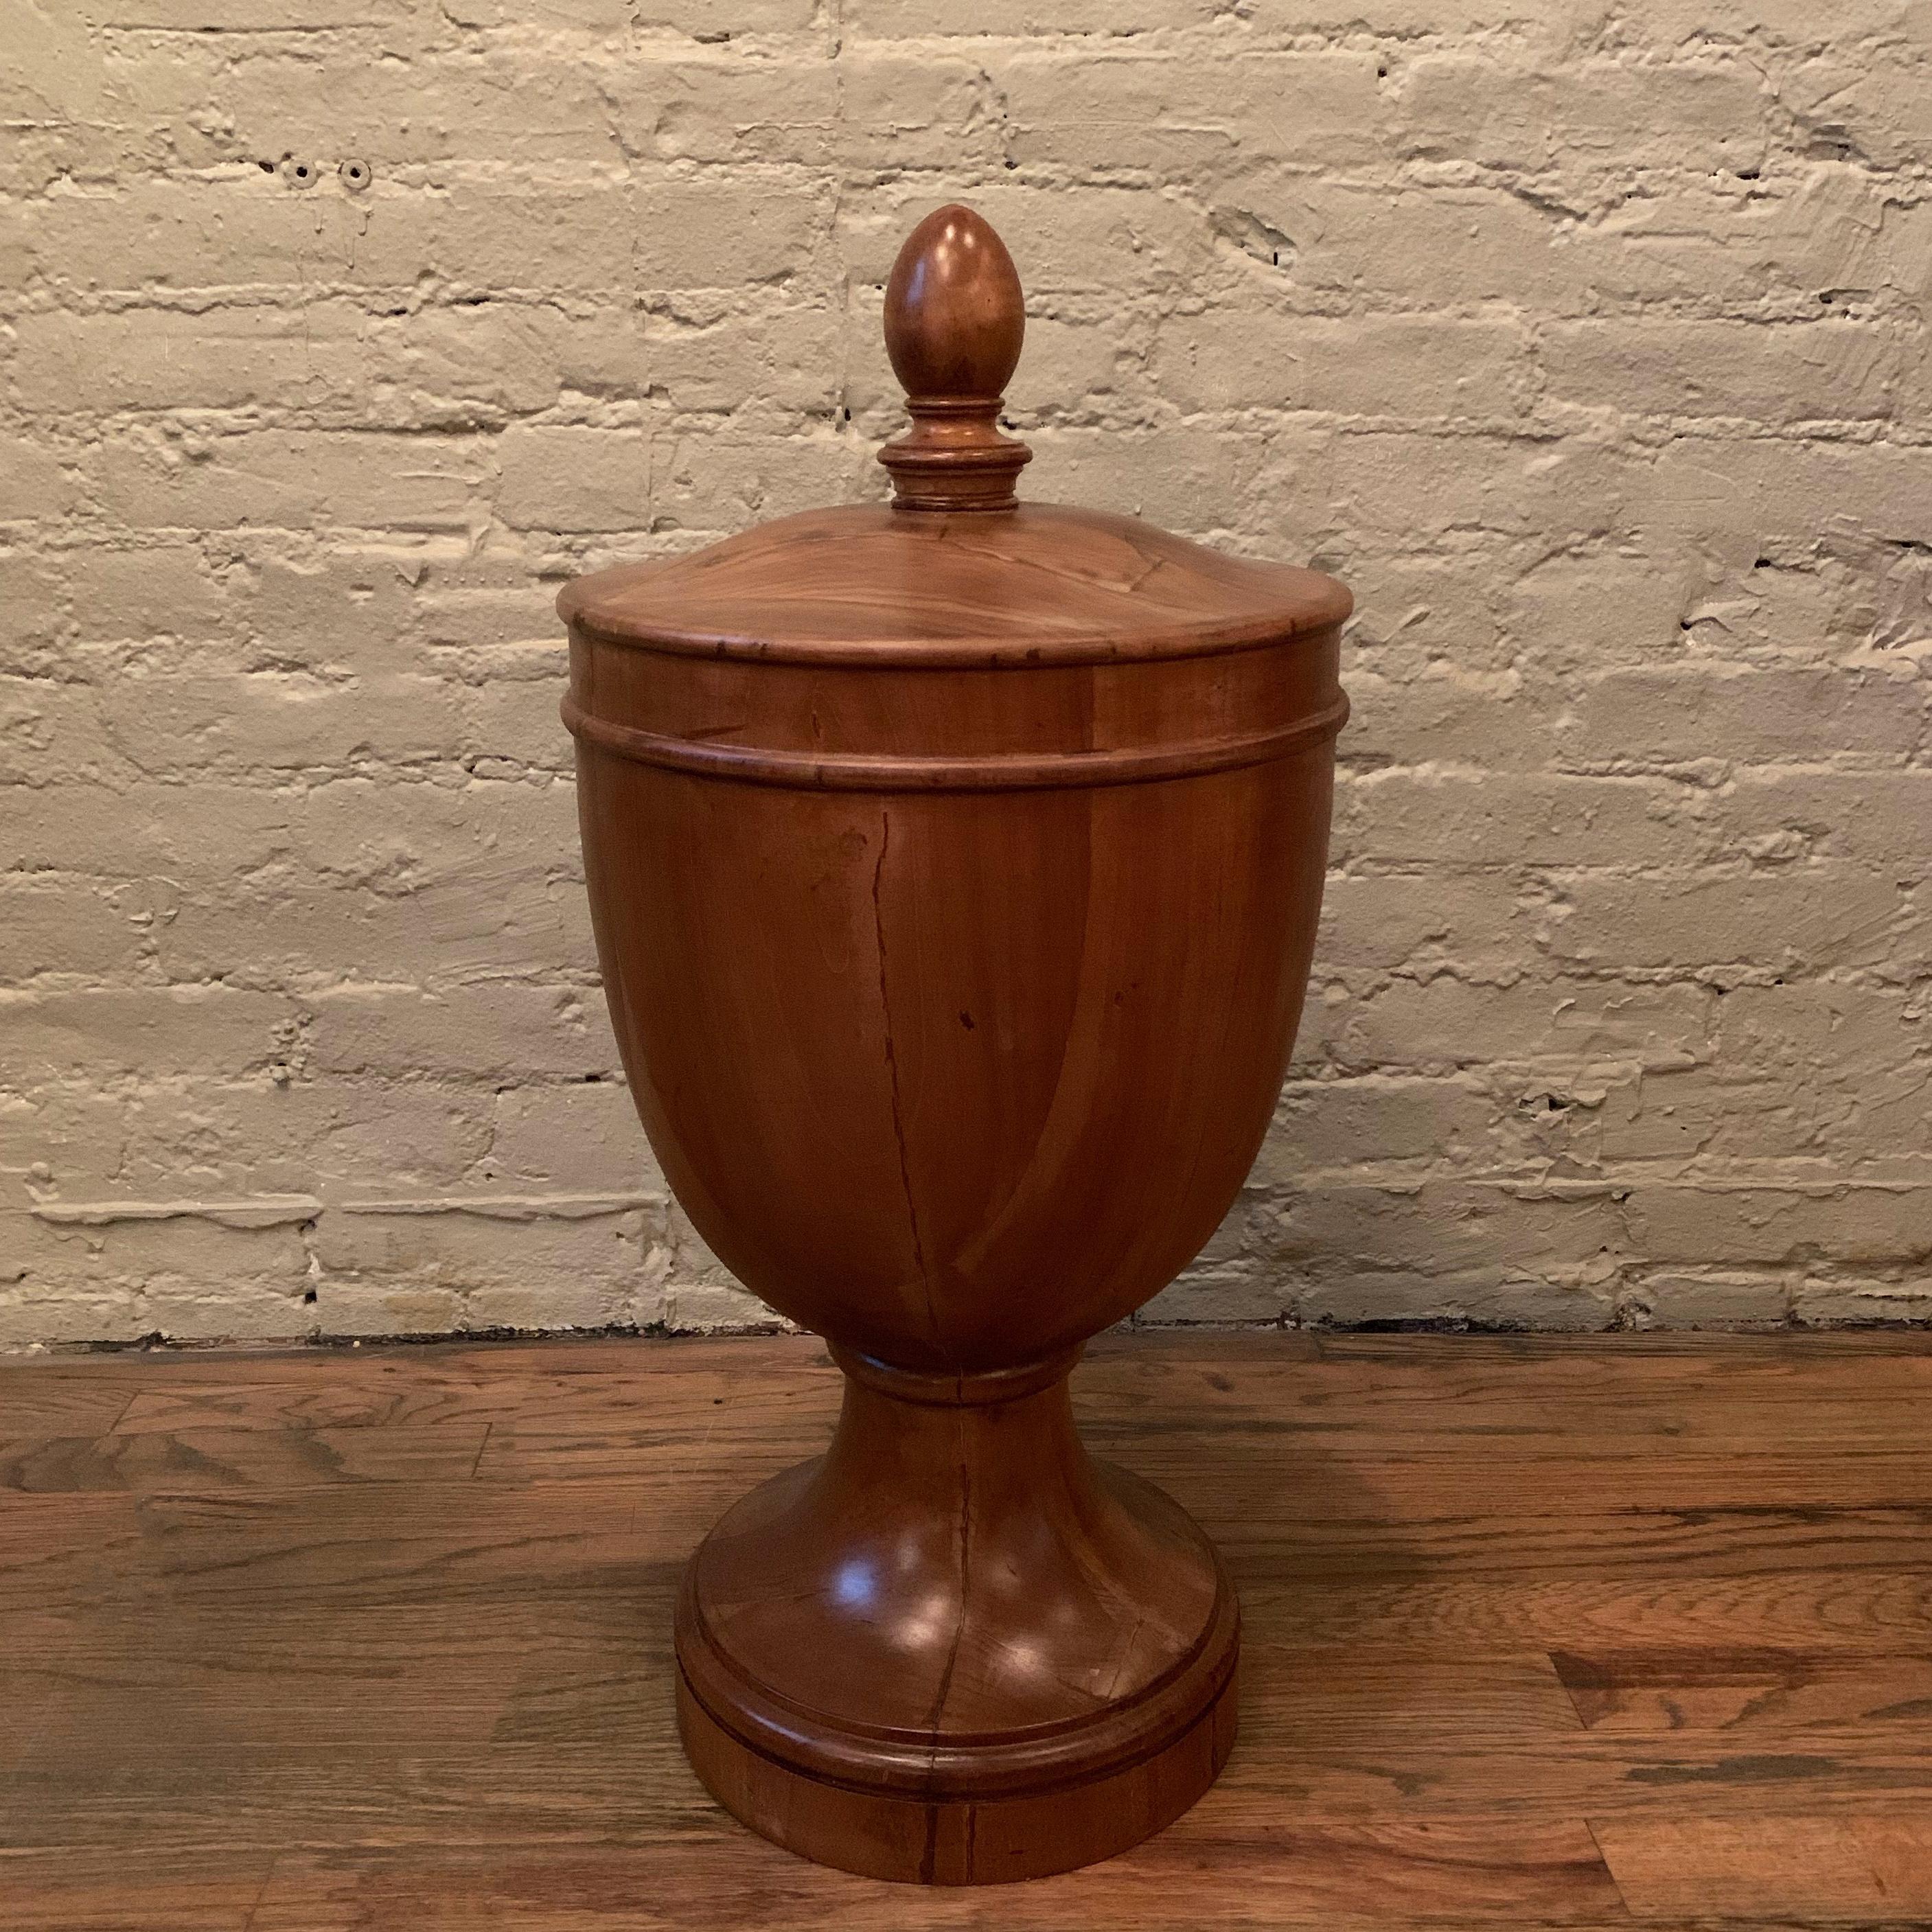 Impressively large, craftsman-made, solid mahogany, finial-shaped ornament or architectural object features a wonderful wood grain throughout.